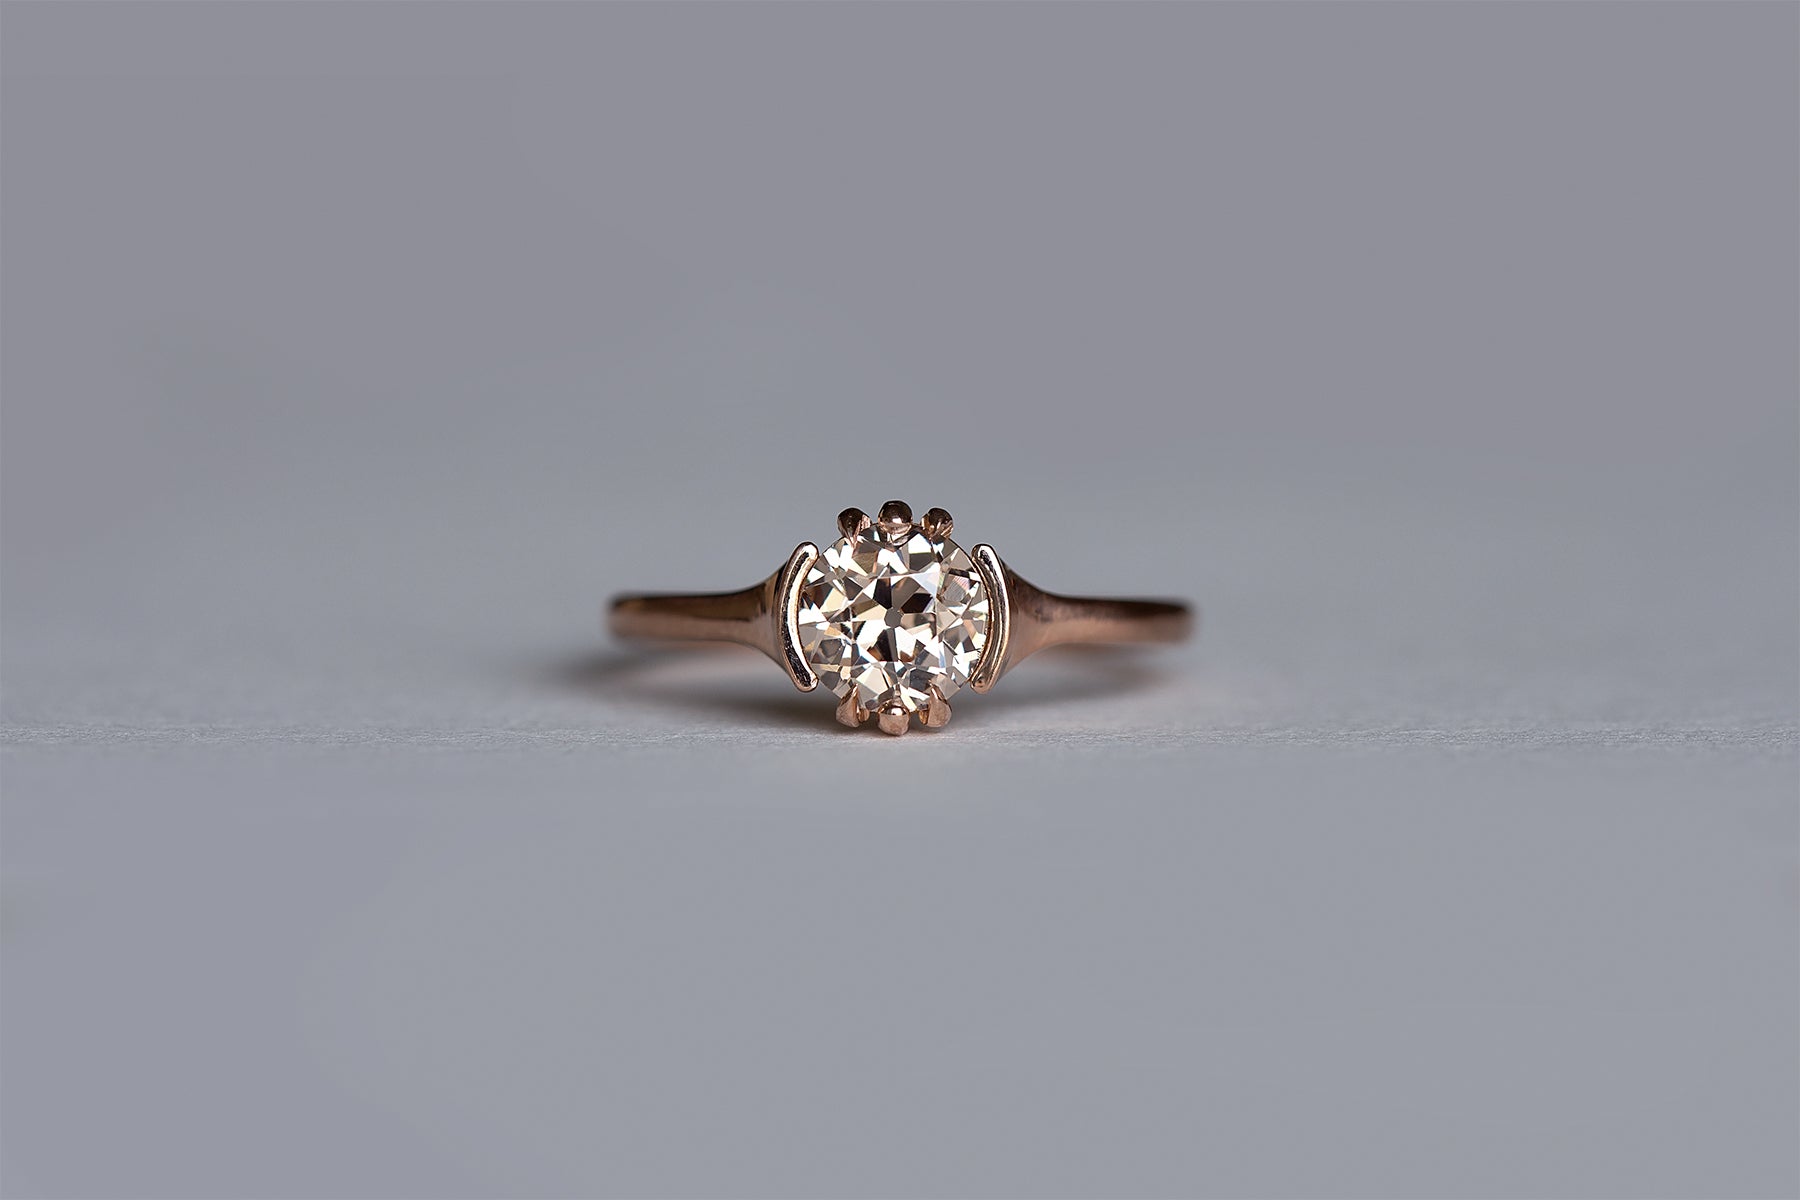 Antique Fancy Pinkish-Brown Old European Cut Diamond Ring - S. Kind & Co